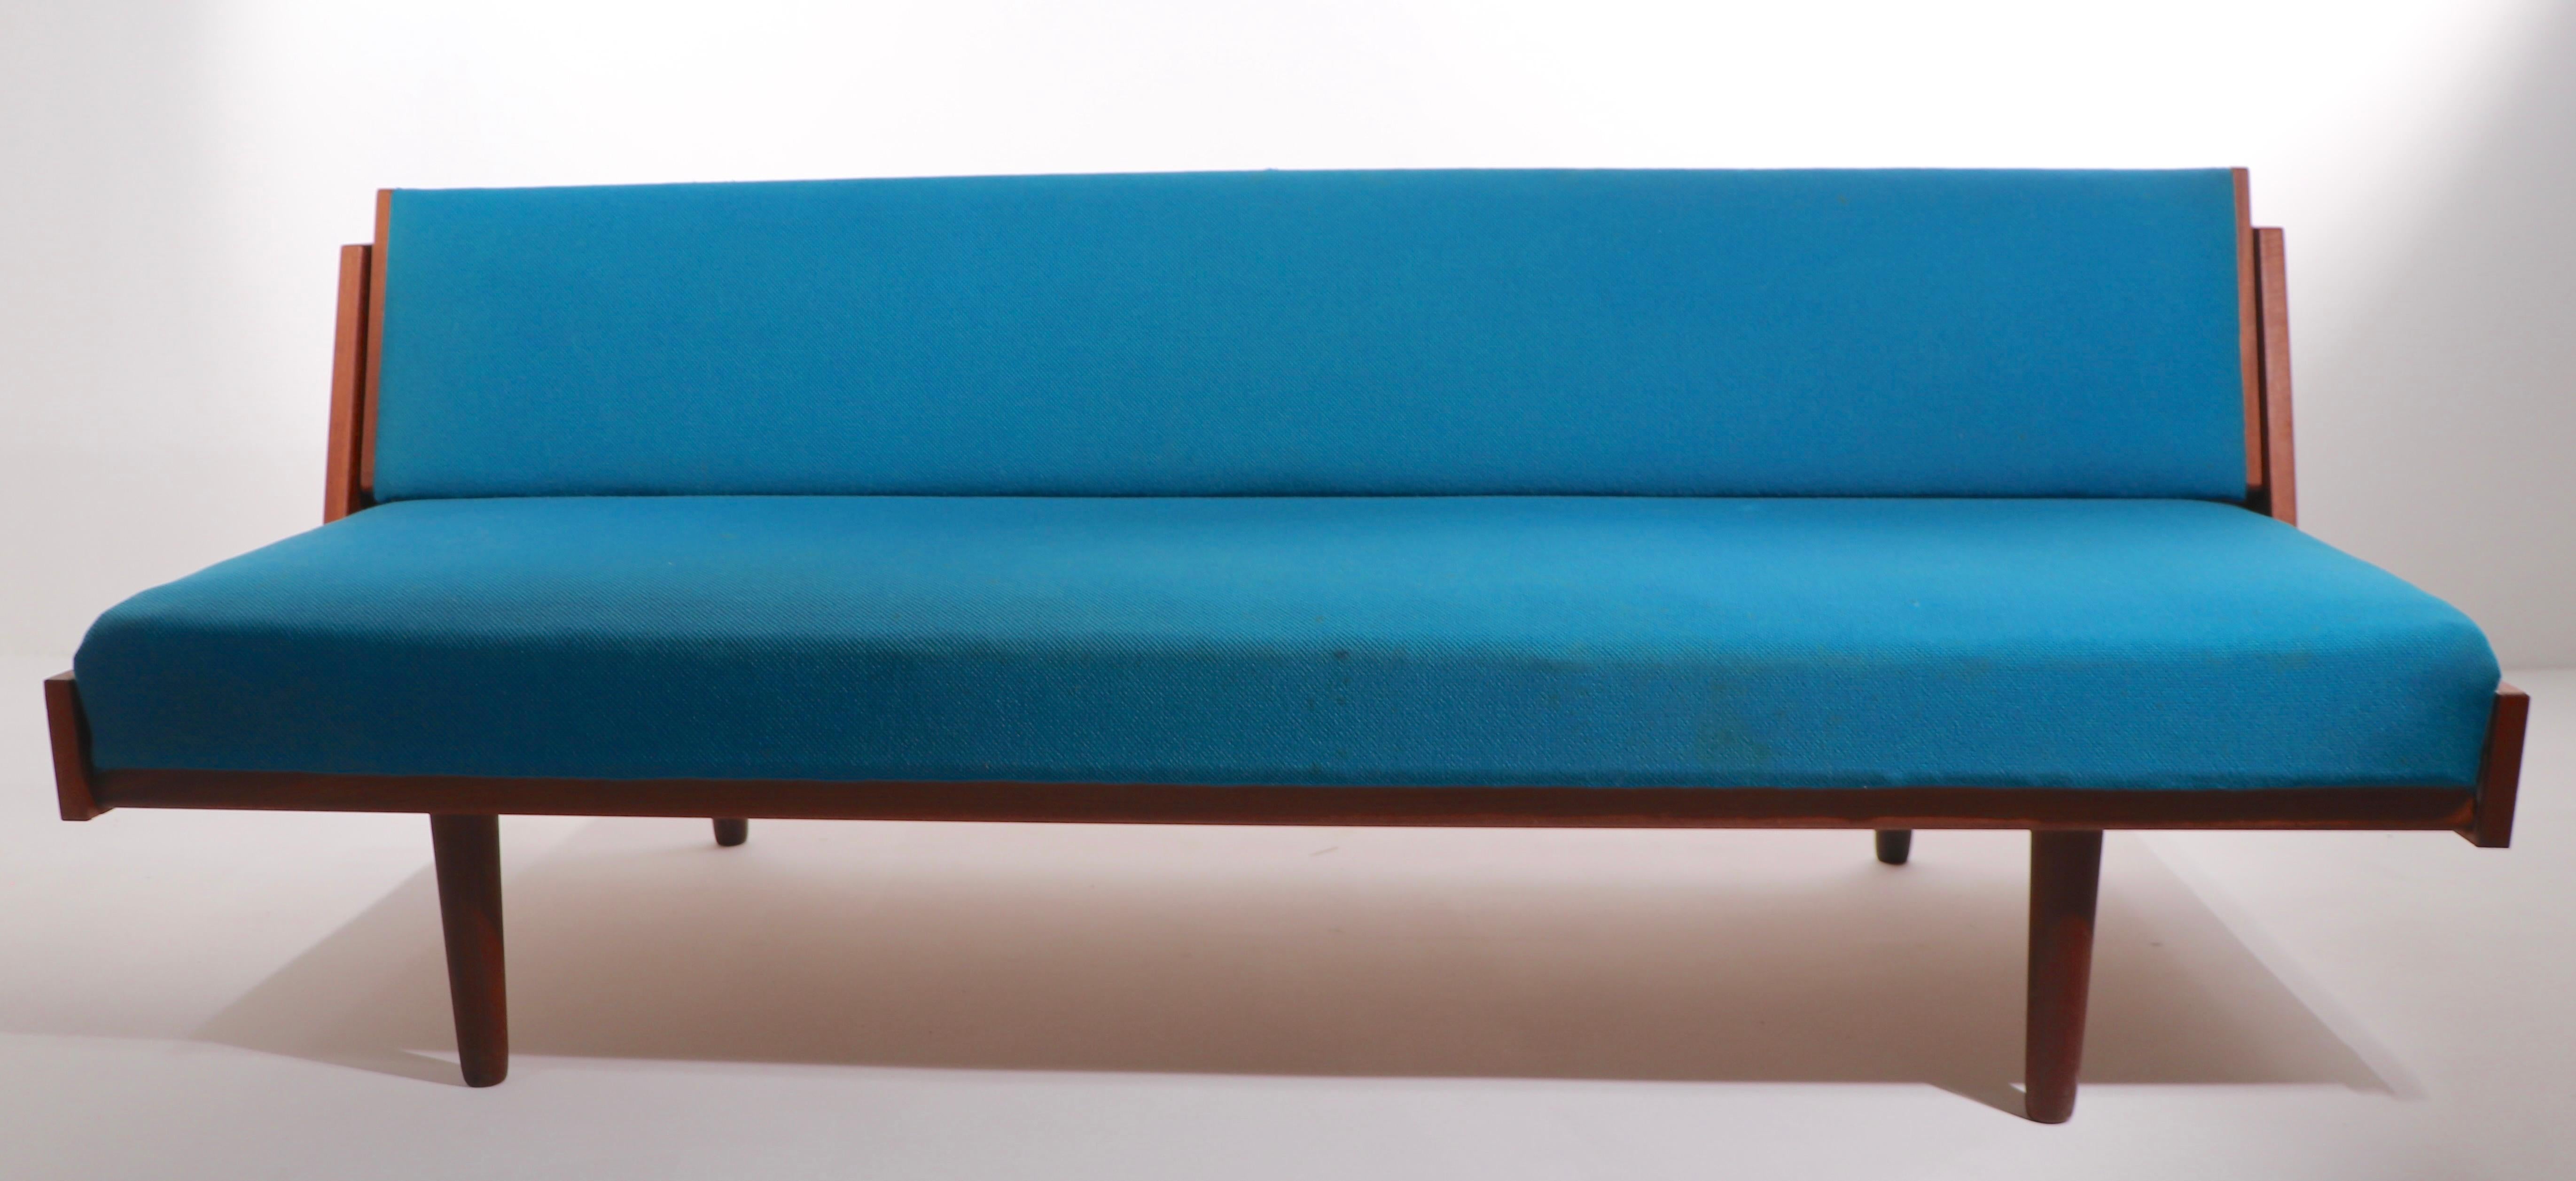 Danish Mid-Century Modern Daybed Sofa by Hans Wegner for Getma For Sale 4